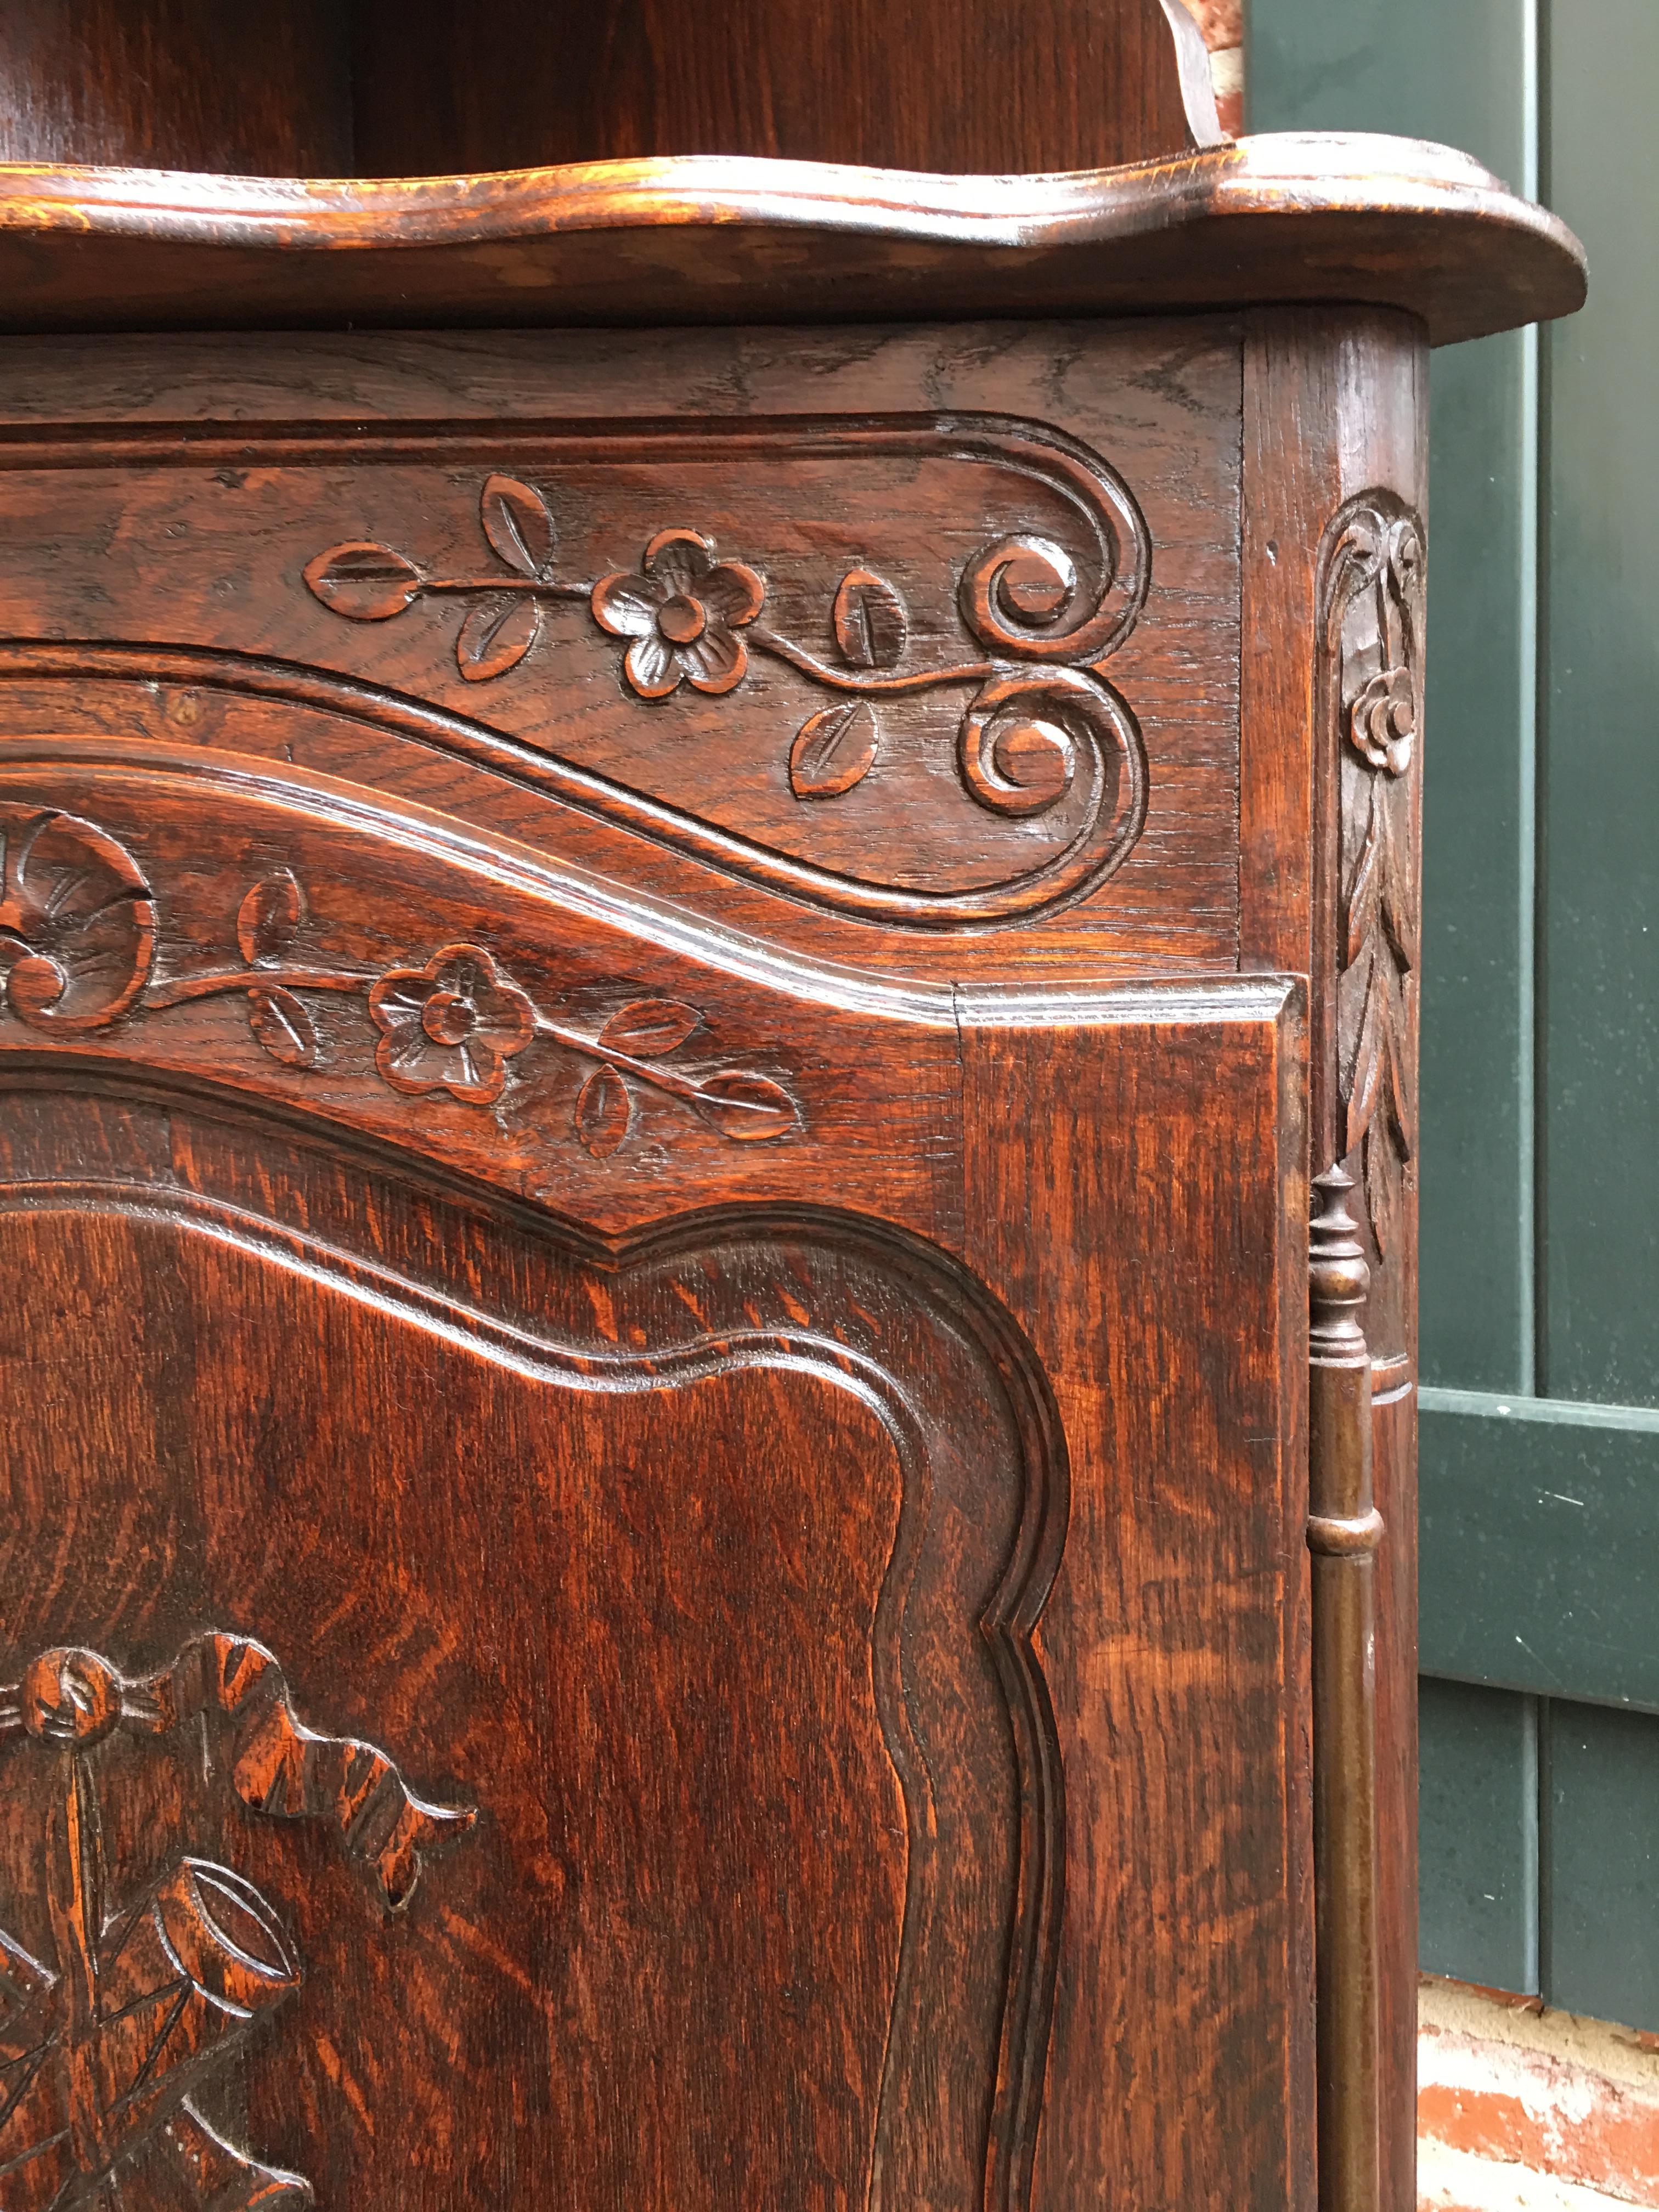 Direct from France, a lovely and unique antique French corner cabinet~
~Beautifully hand carved upper crown with serpentine edges and finials~
~Wide carved serpentine apron on each of the gallery edge shelves~
~The lower cabinet is also completely